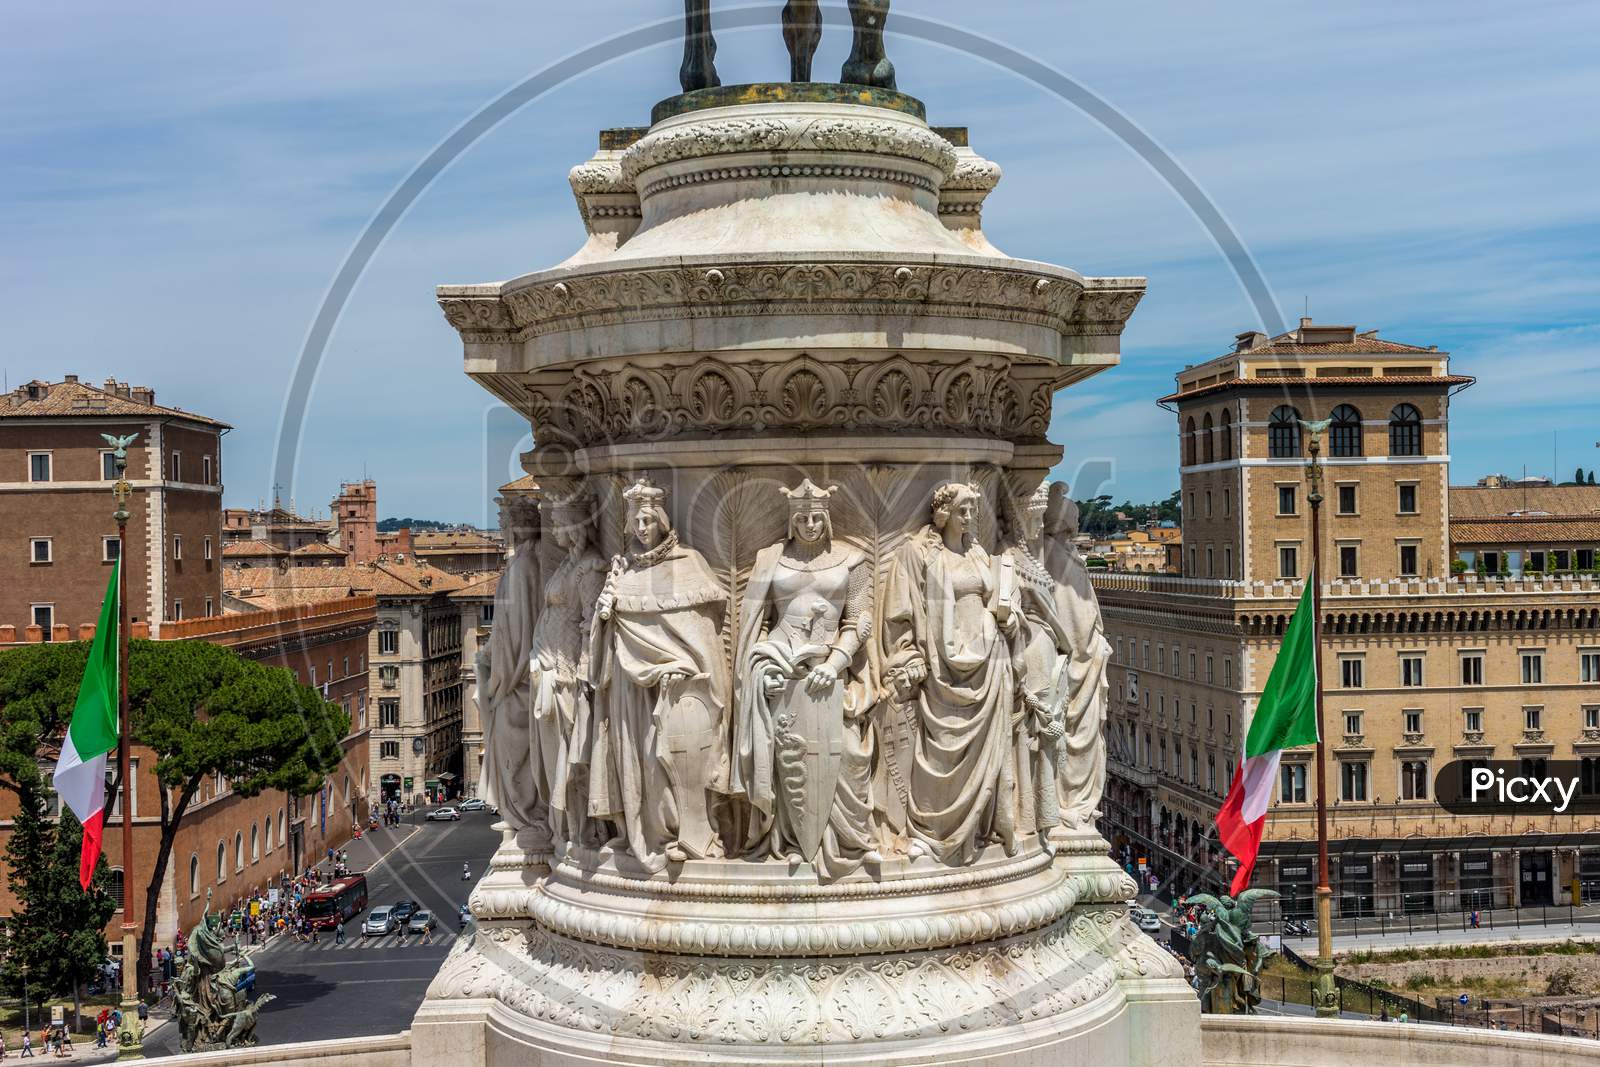 Rome, Italy - 23 June 2018: Piazza Venezia, Facade Of Tomb Of The Unknown Soldier In Rome,Italy